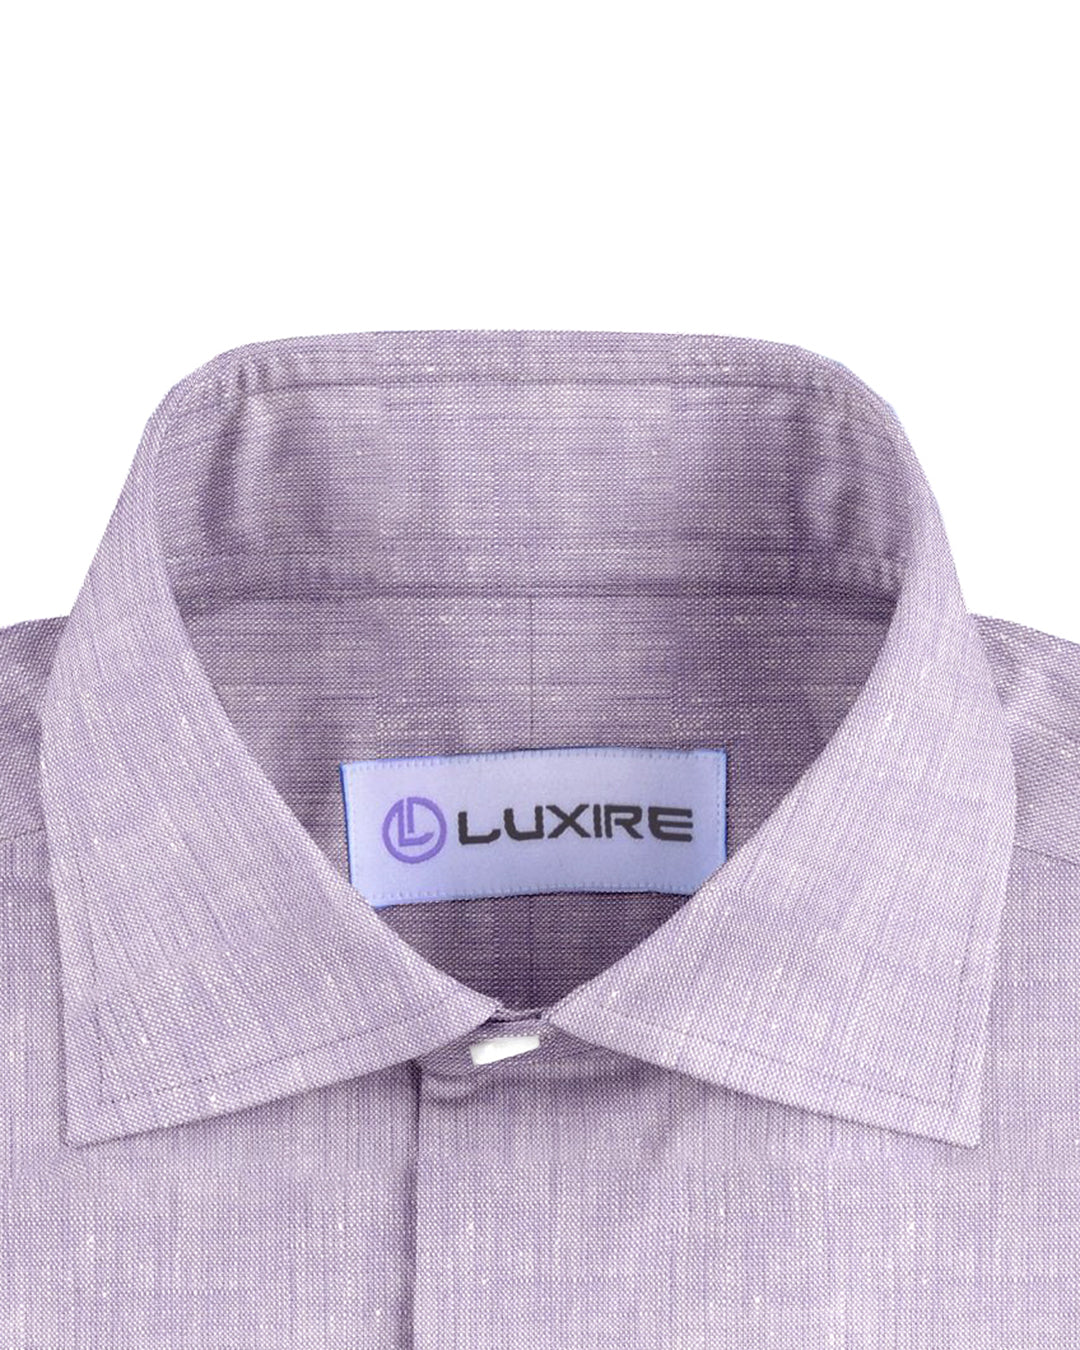 Collar of the custom linen shirt for men in light purple by Luxire Clothing